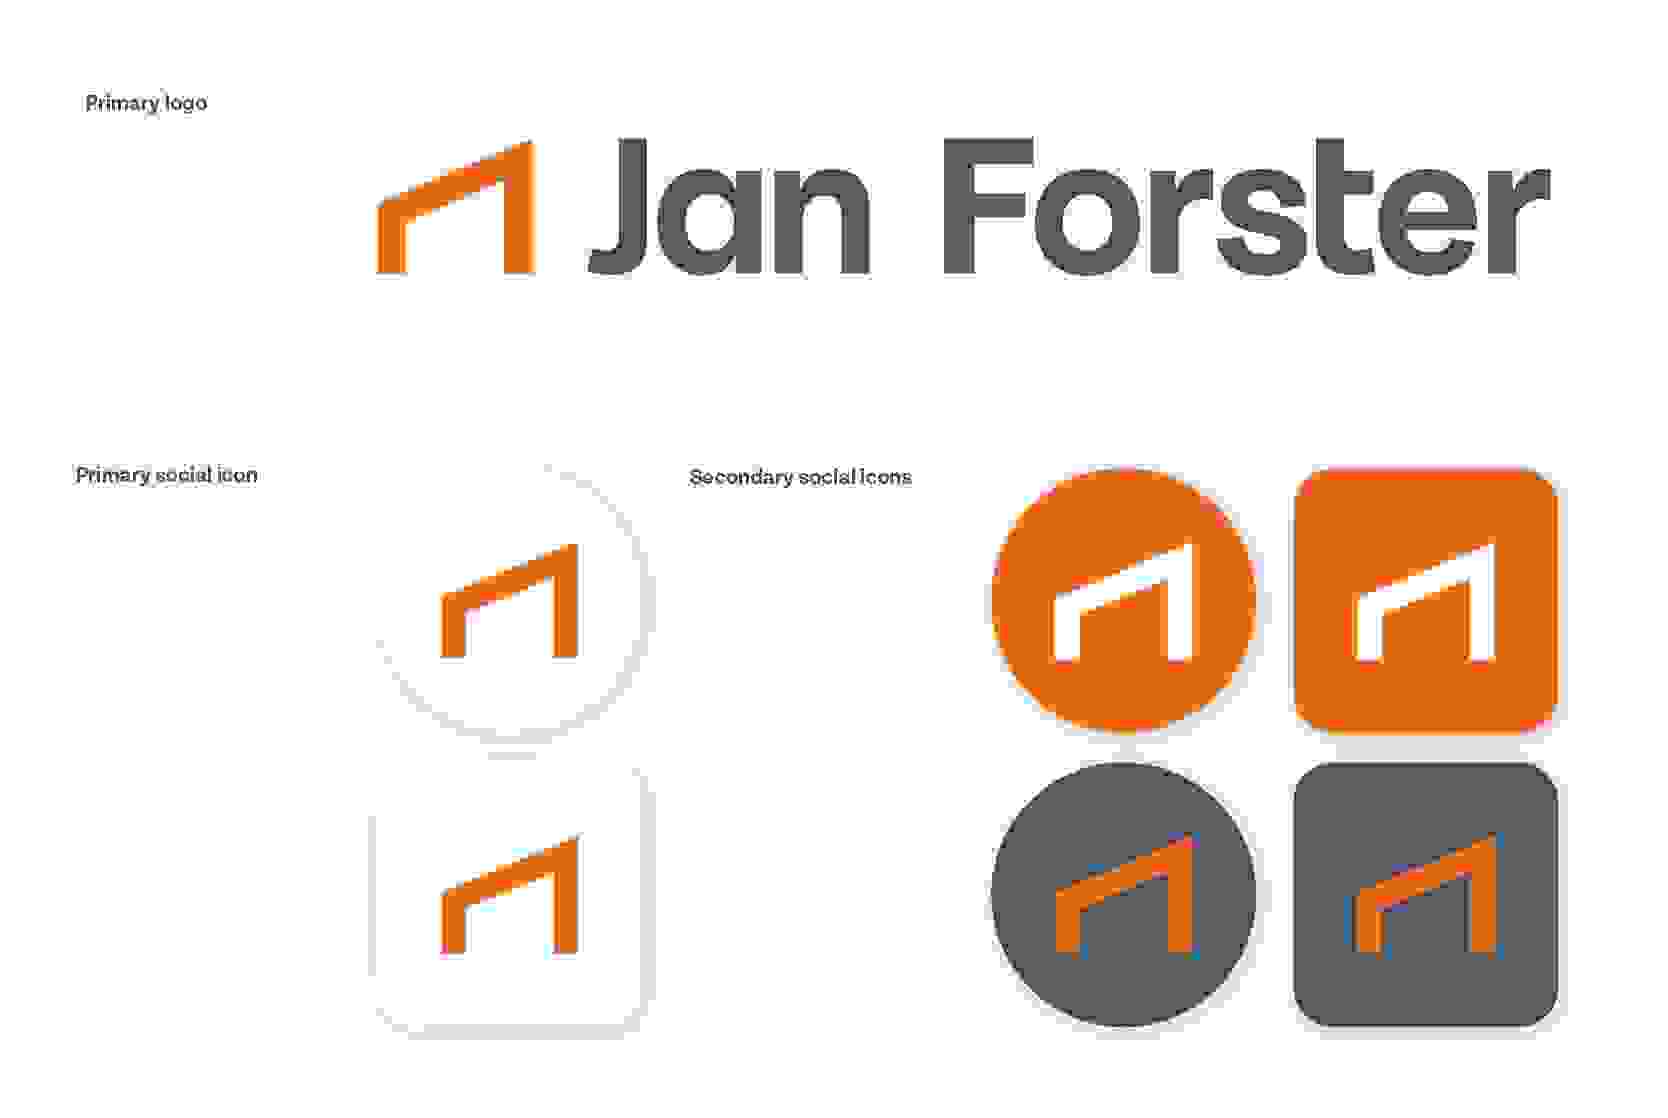 Jan Forster logos and icons for social media